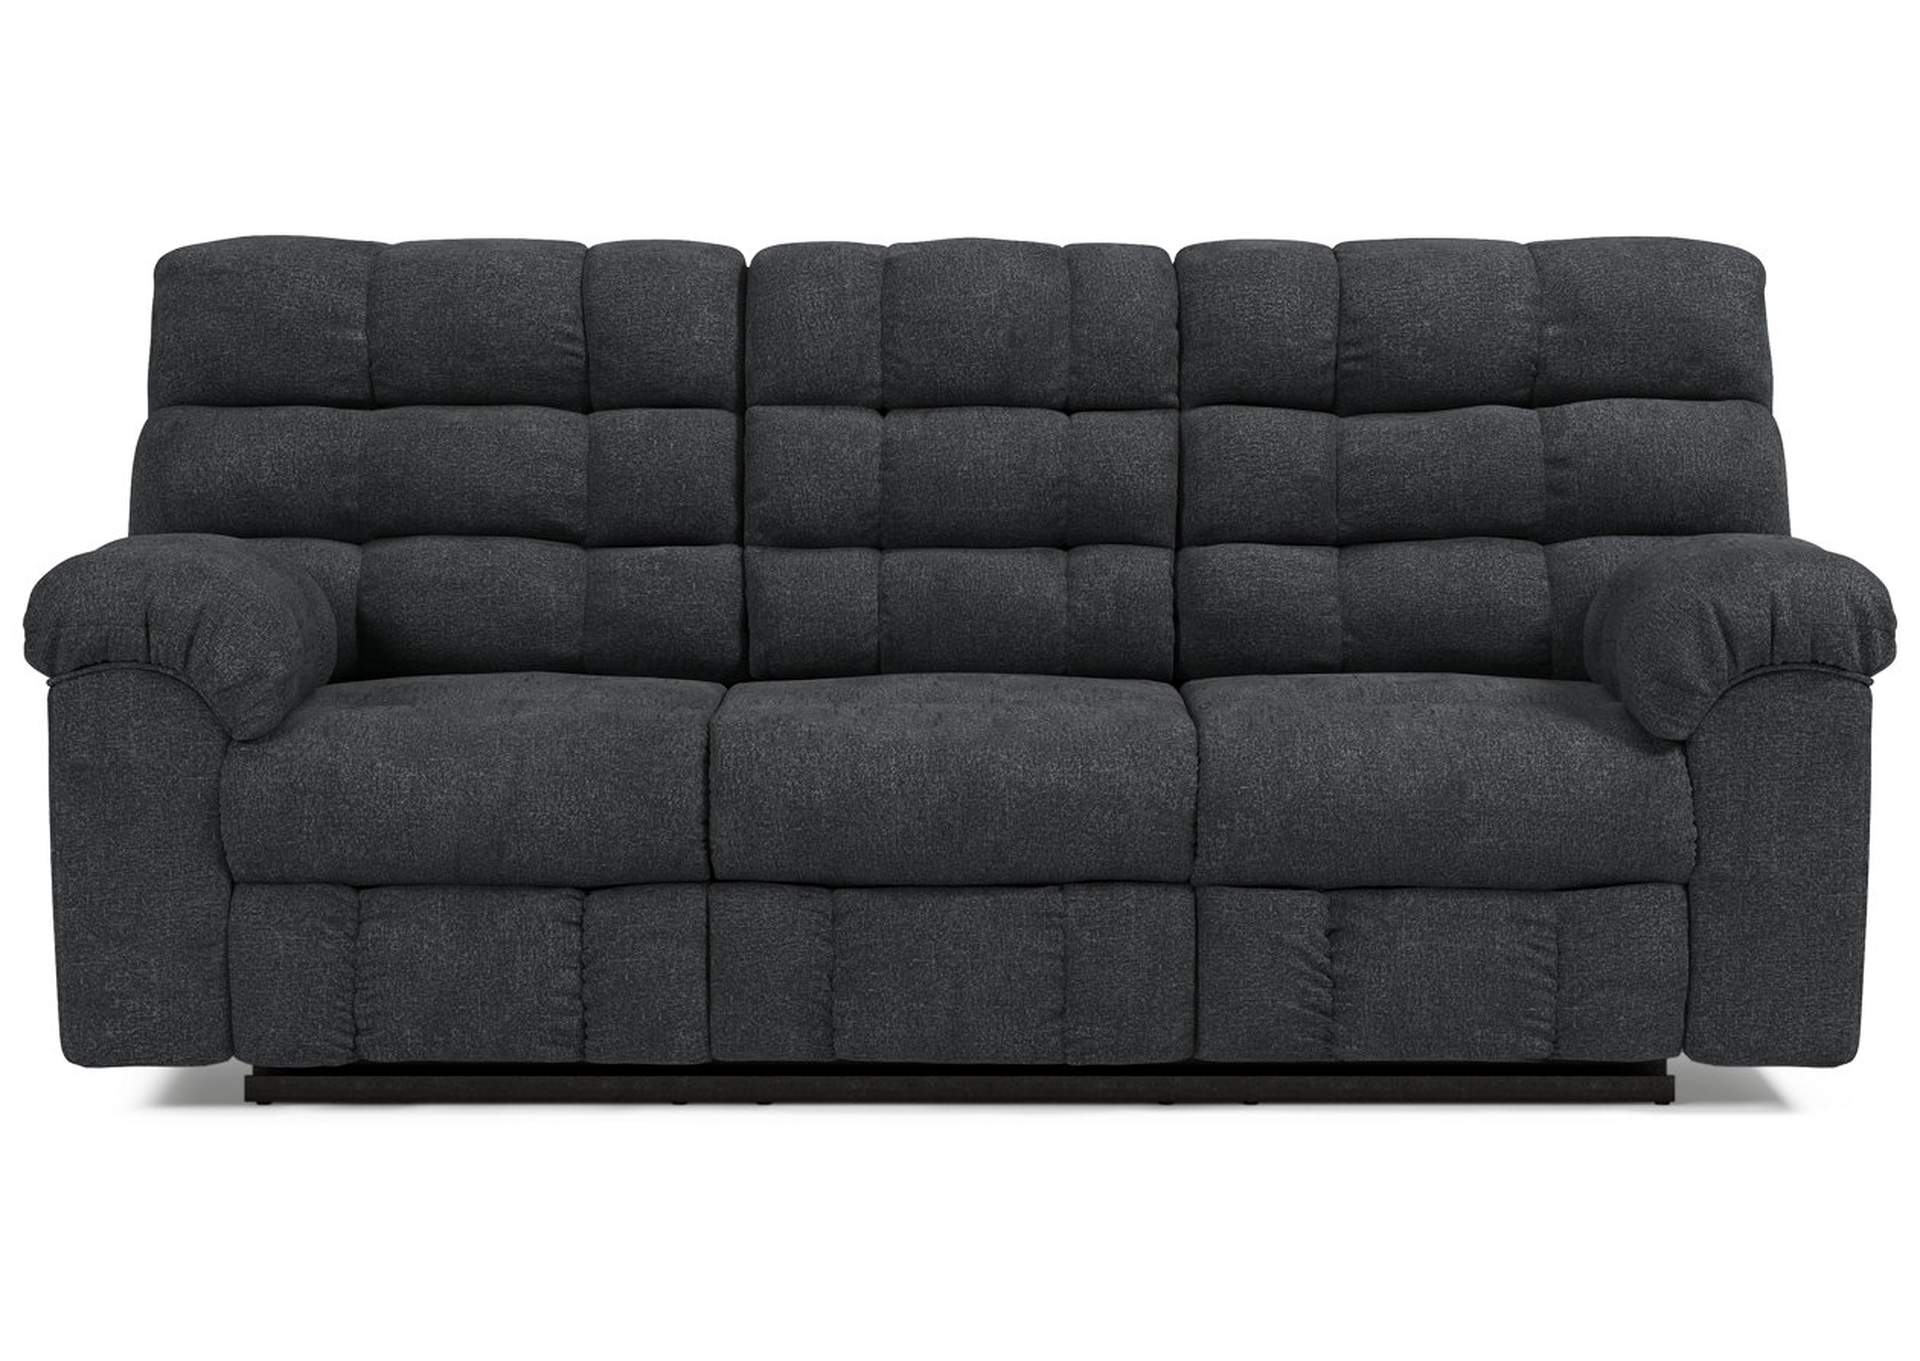 Wilhurst Reclining Sofa with Drop Down Table,Signature Design By Ashley